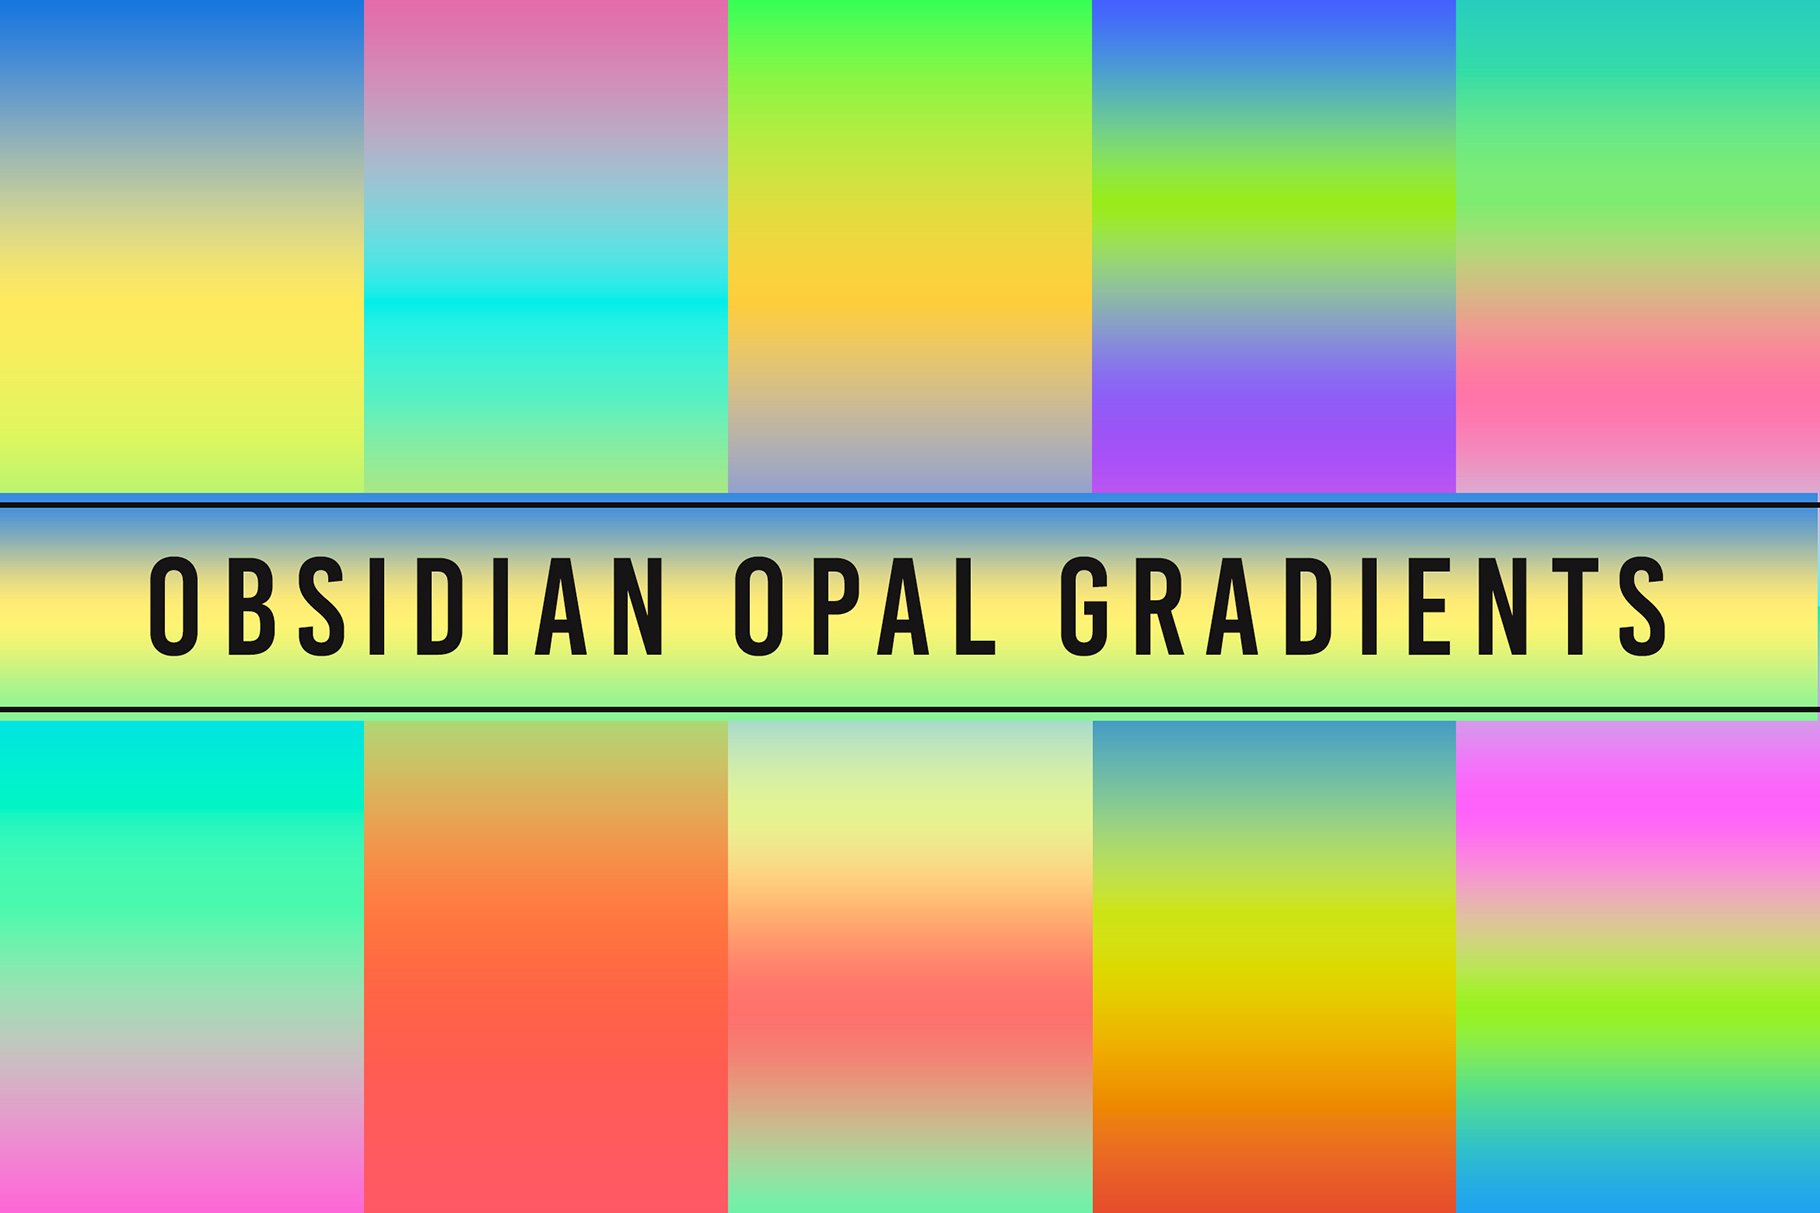 Obsidian Opal Gradients cover image.